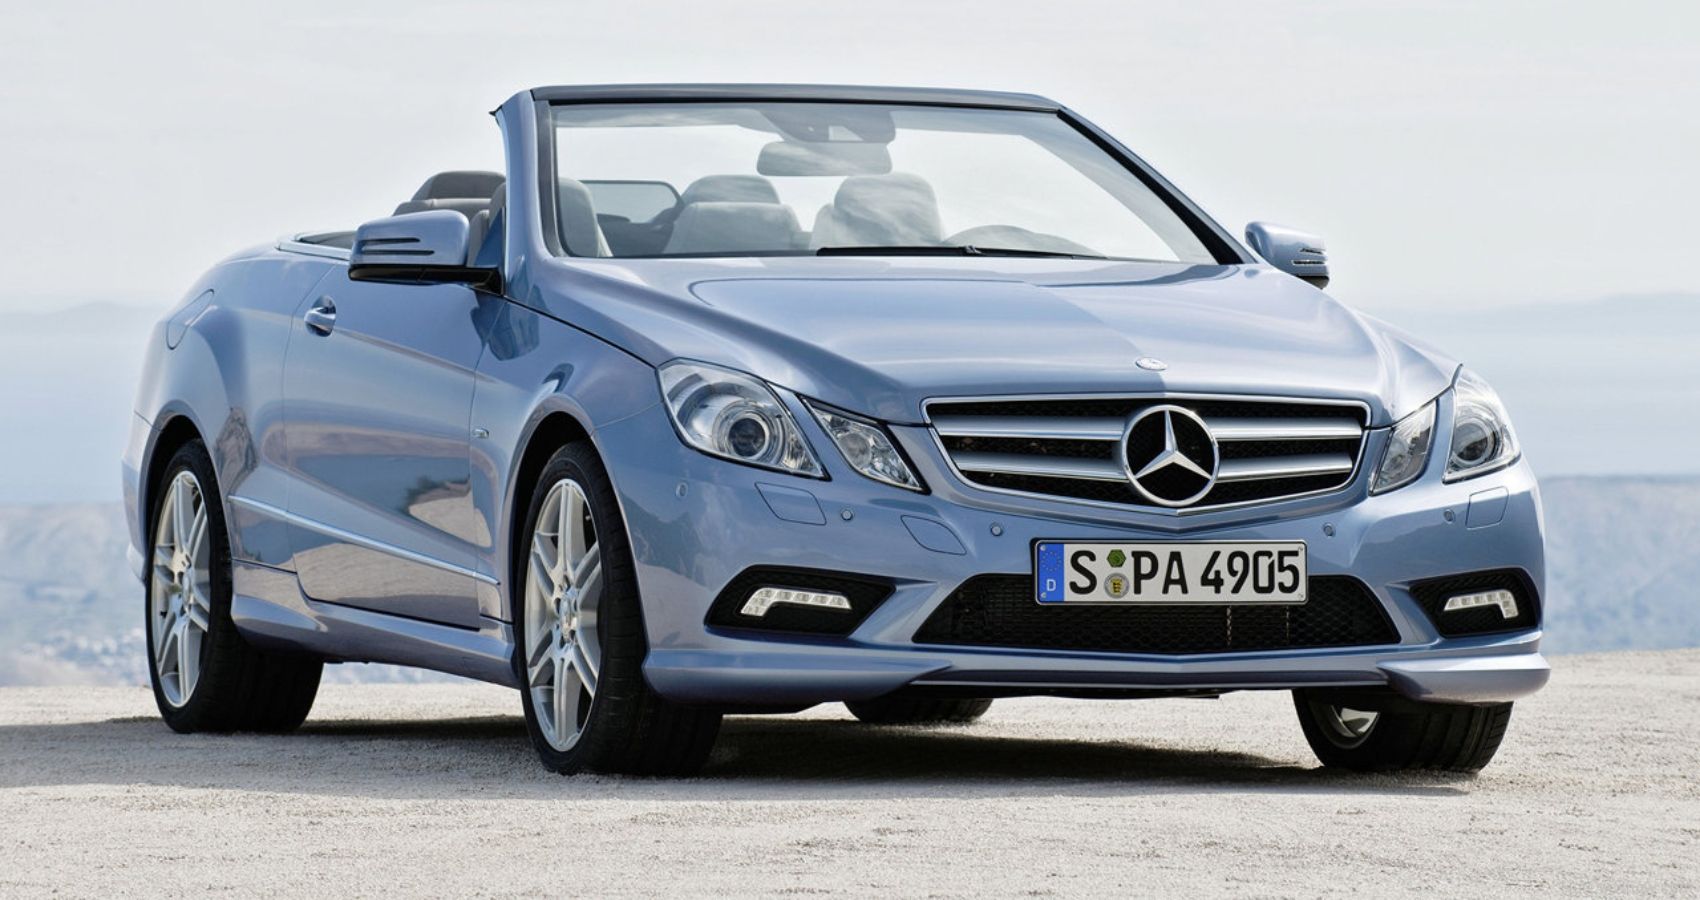 Mercedes-Benz E-Class Cabriolet (2012) - Front Angle in light blue